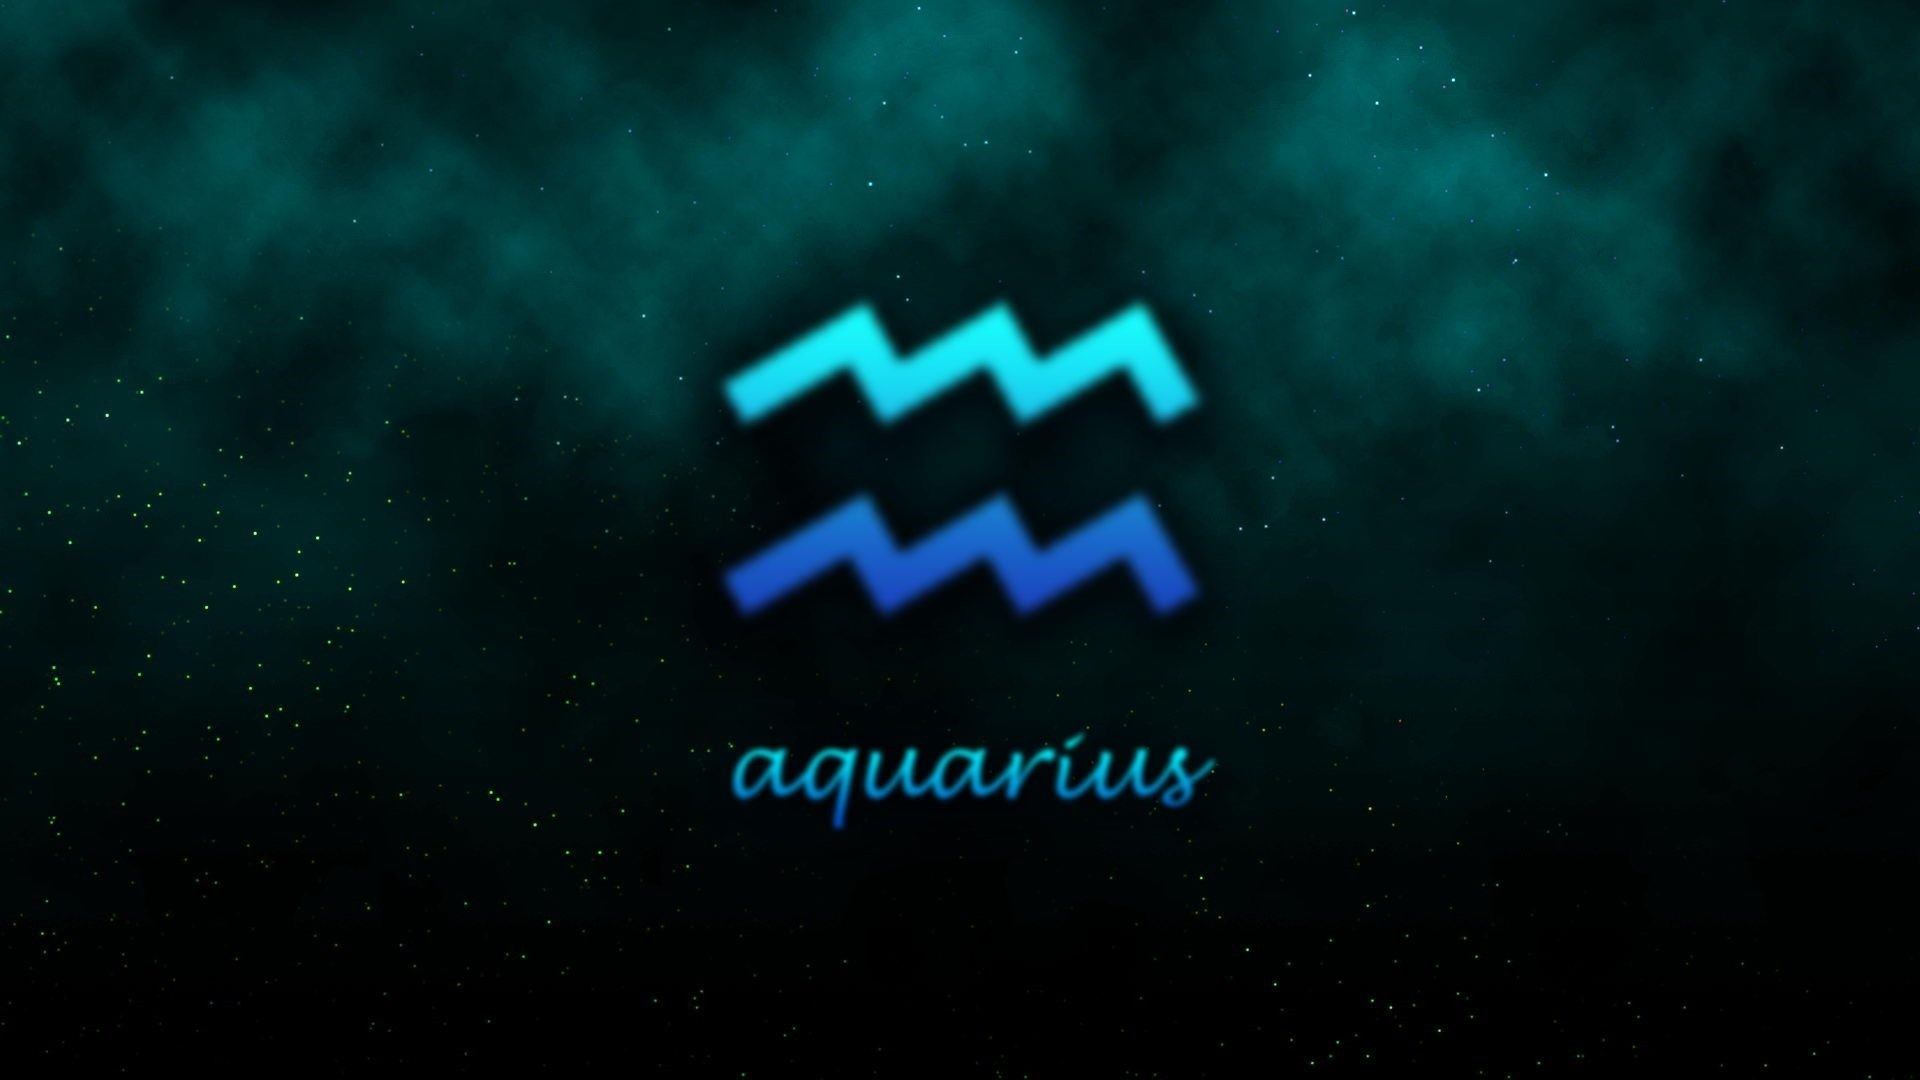 4k Aquarius Wallpaper  Download to your mobile from PHONEKY